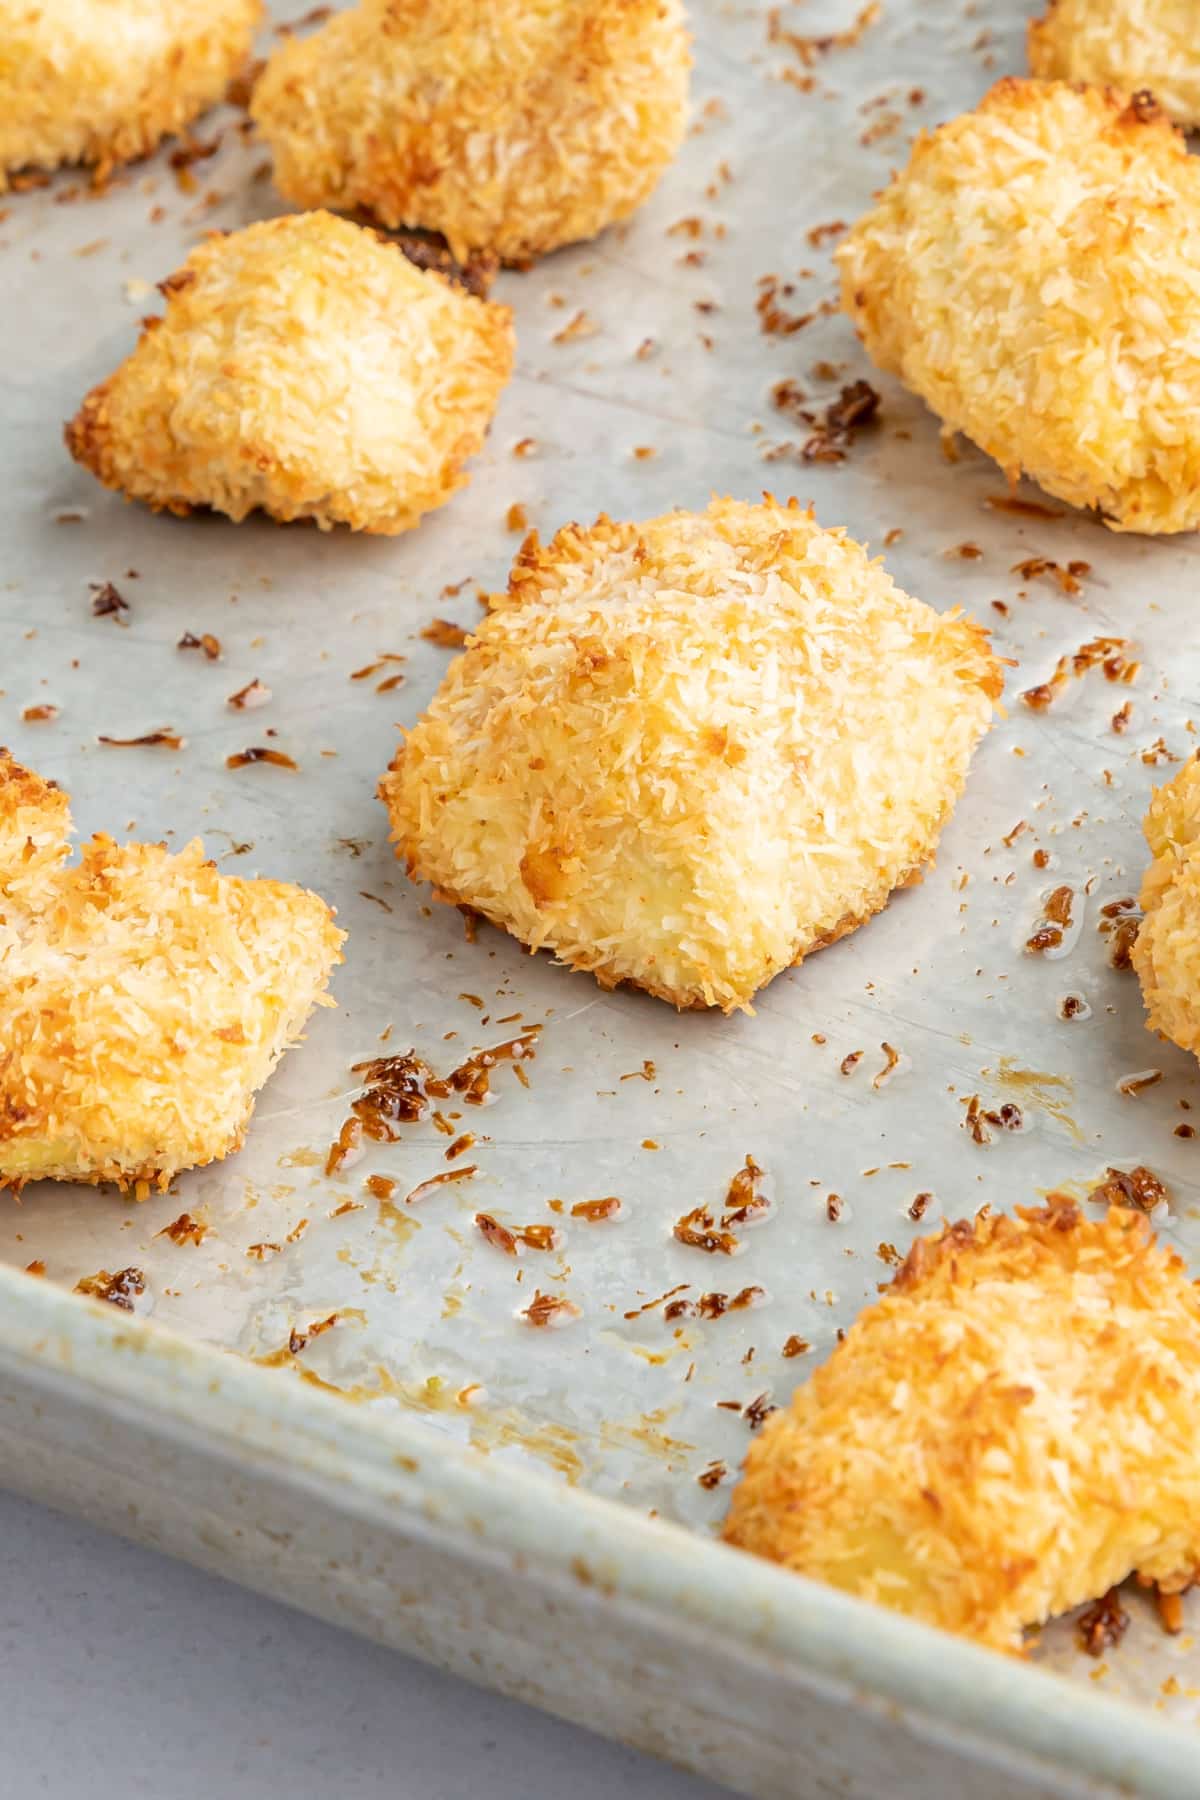 A baking sheet of crispy golden baked coconut tofu pieces.